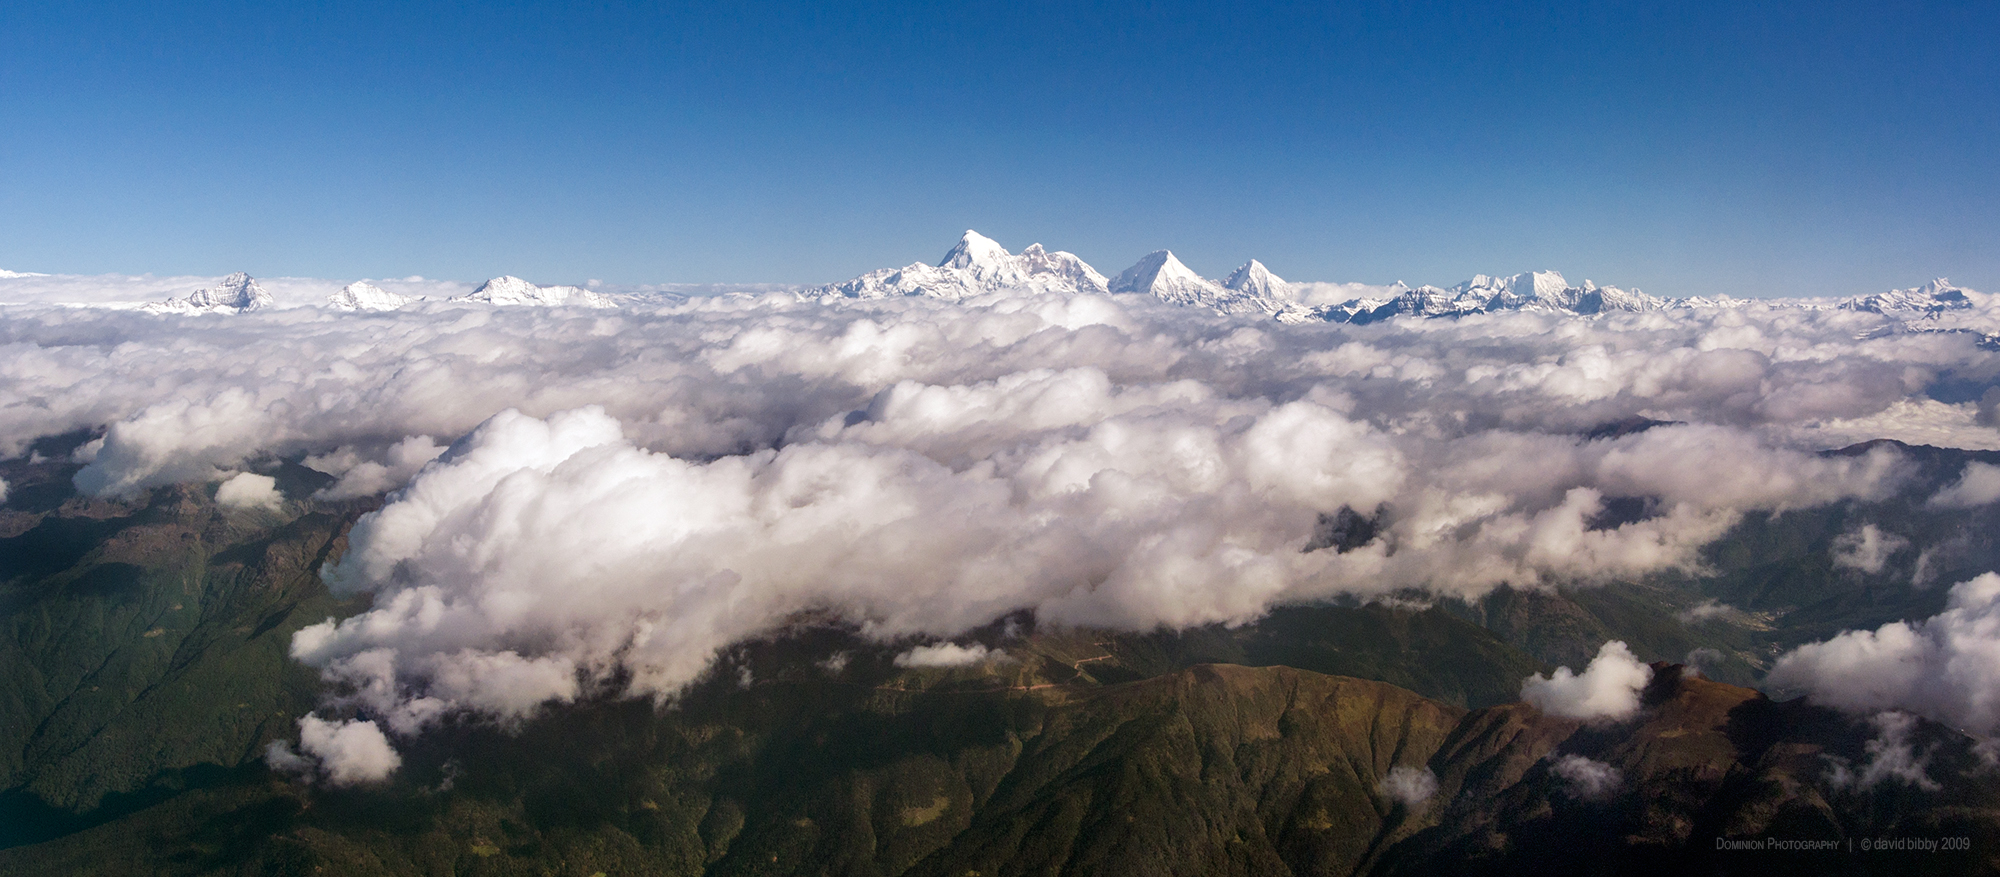   4 nations under cloud  - The peak at left is Kanchenjunga (8586m). The high peaks in the centre of the shot are Jomolhari (7314m), Jomolhari II (6935m), Jitchu Drake (6850m) and Tsheri Kang (6526m). Nepal and India, Bhutan and Tibet. 